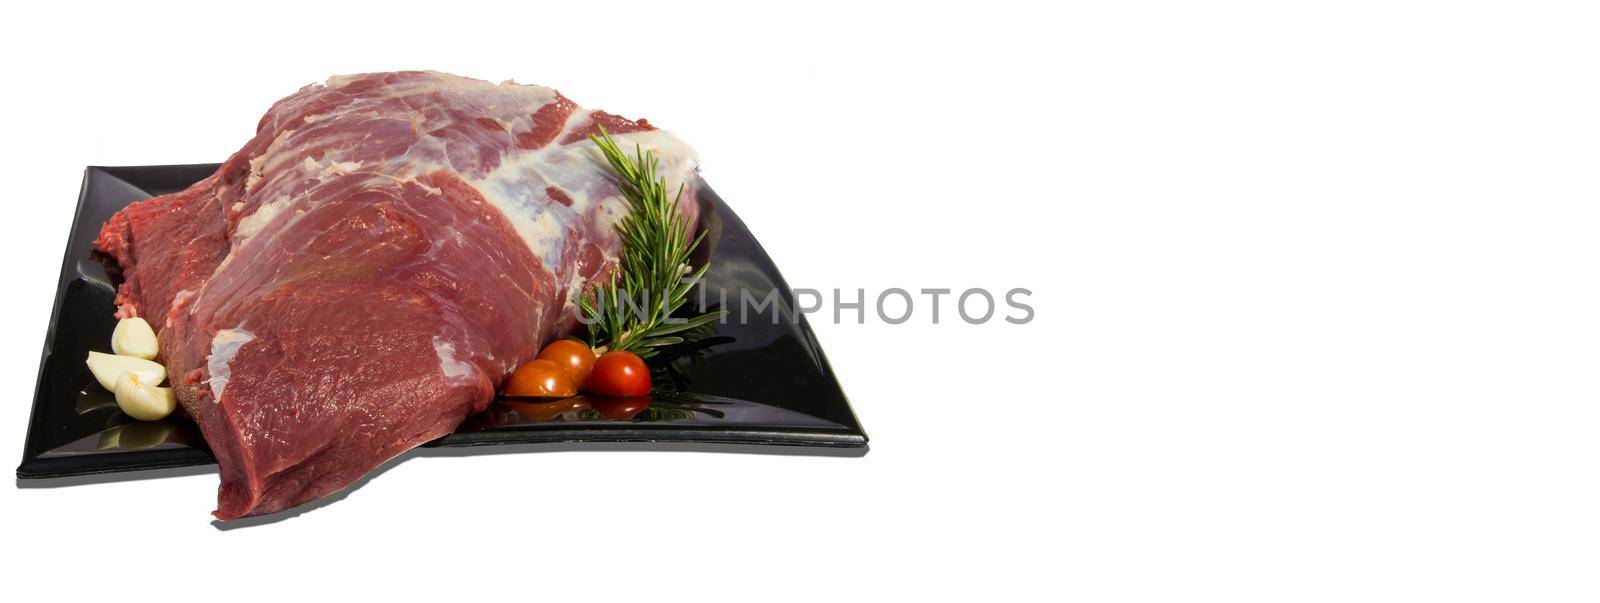 Raw meat dish white background 4 by pippocarlot